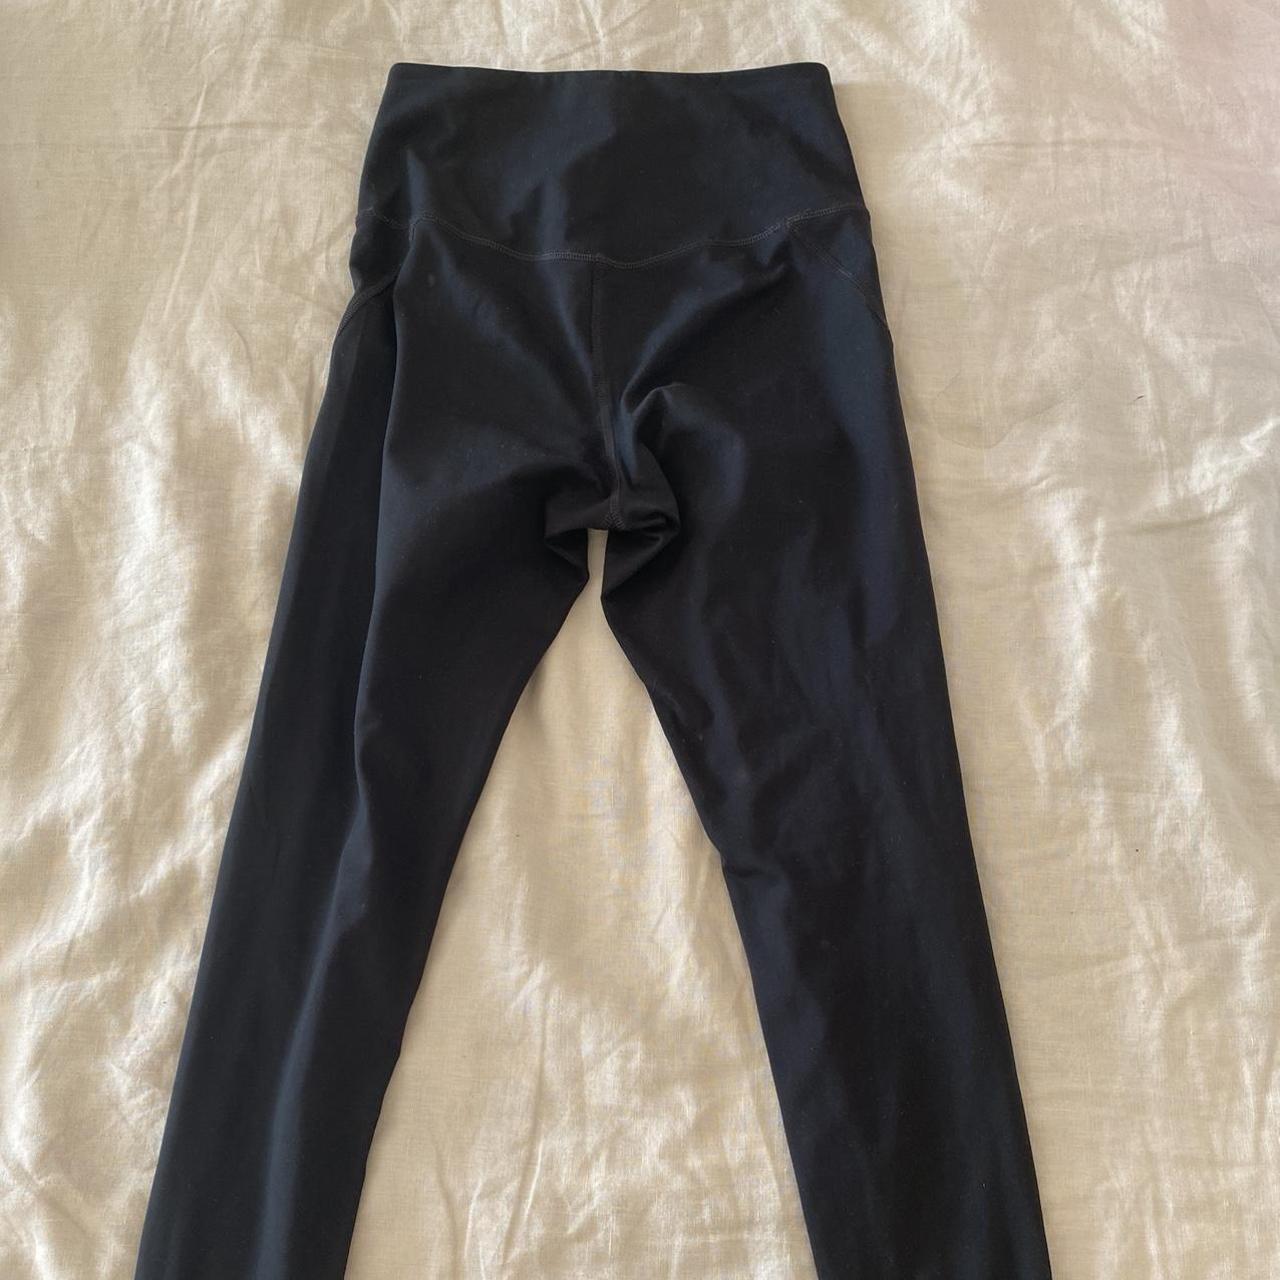 Girlfriend Collective compressive leggings with - Depop